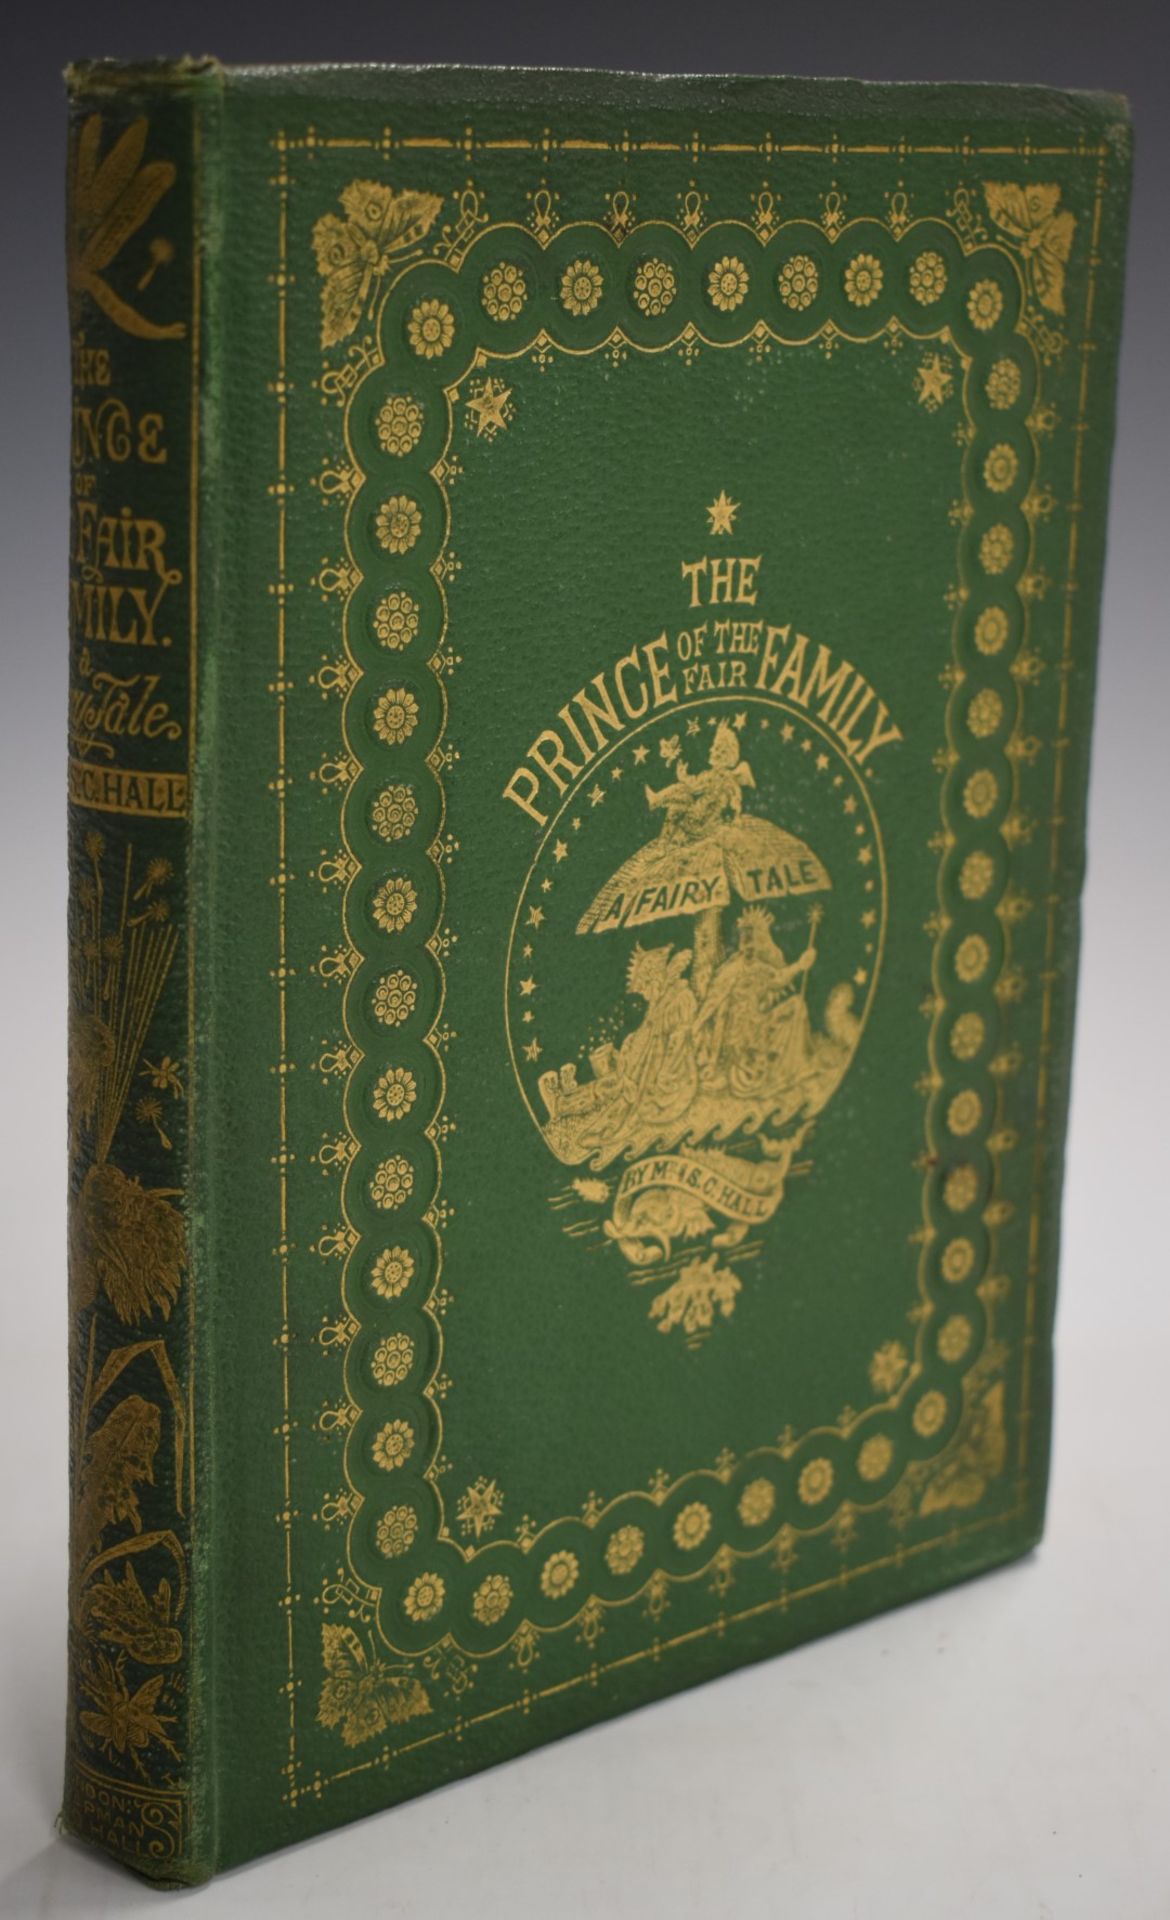 [Signed] Mrs. S.C. Hall The Prince of The Fair Family A Fairy Tale published Chapman & Hall (1867)